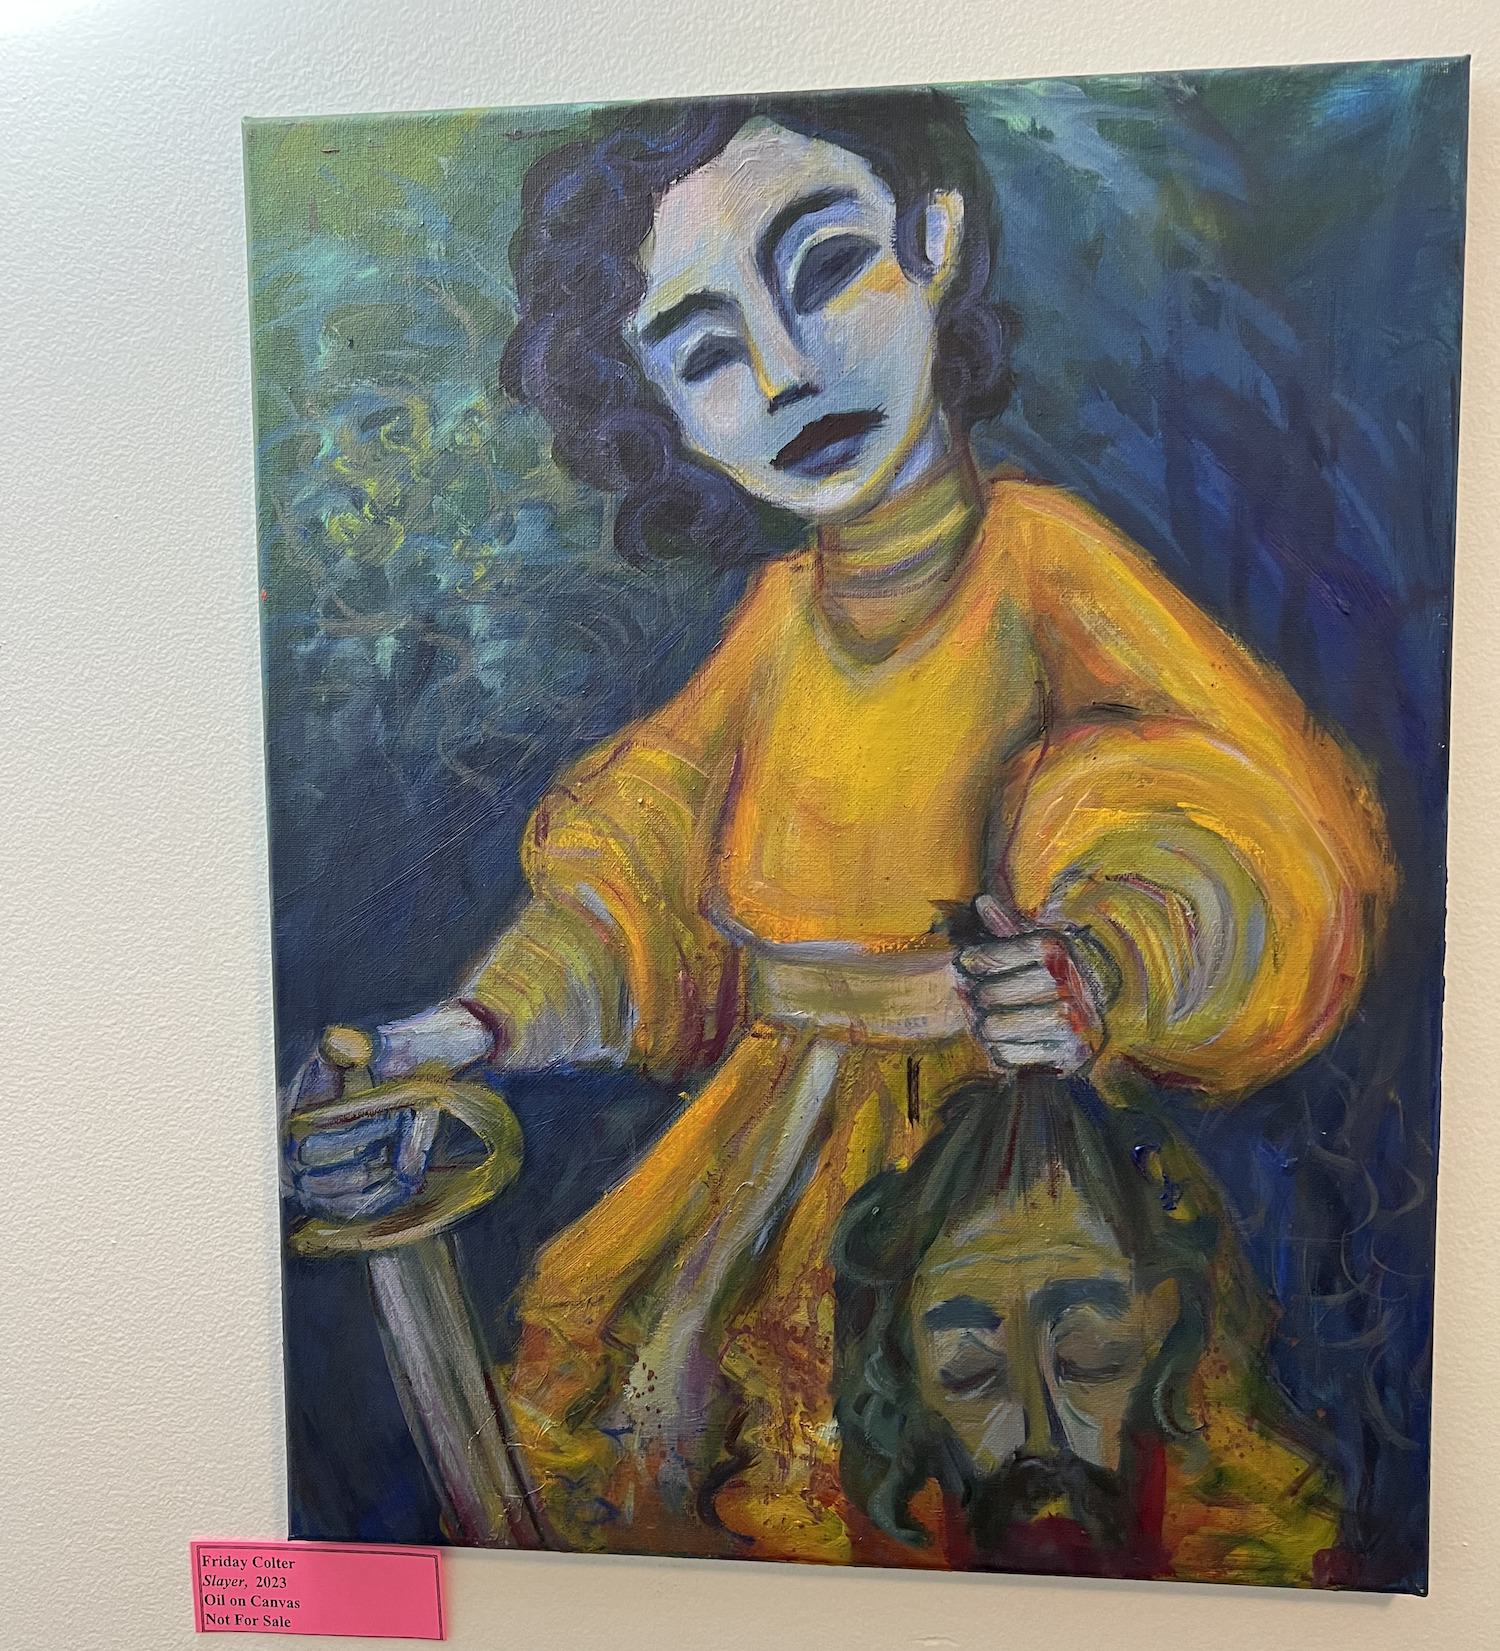 An oil on canvas painting "Slayer" depicts a young woman in a yellow dress holding a sword in her right hand an a decapitated male head in her right hand 